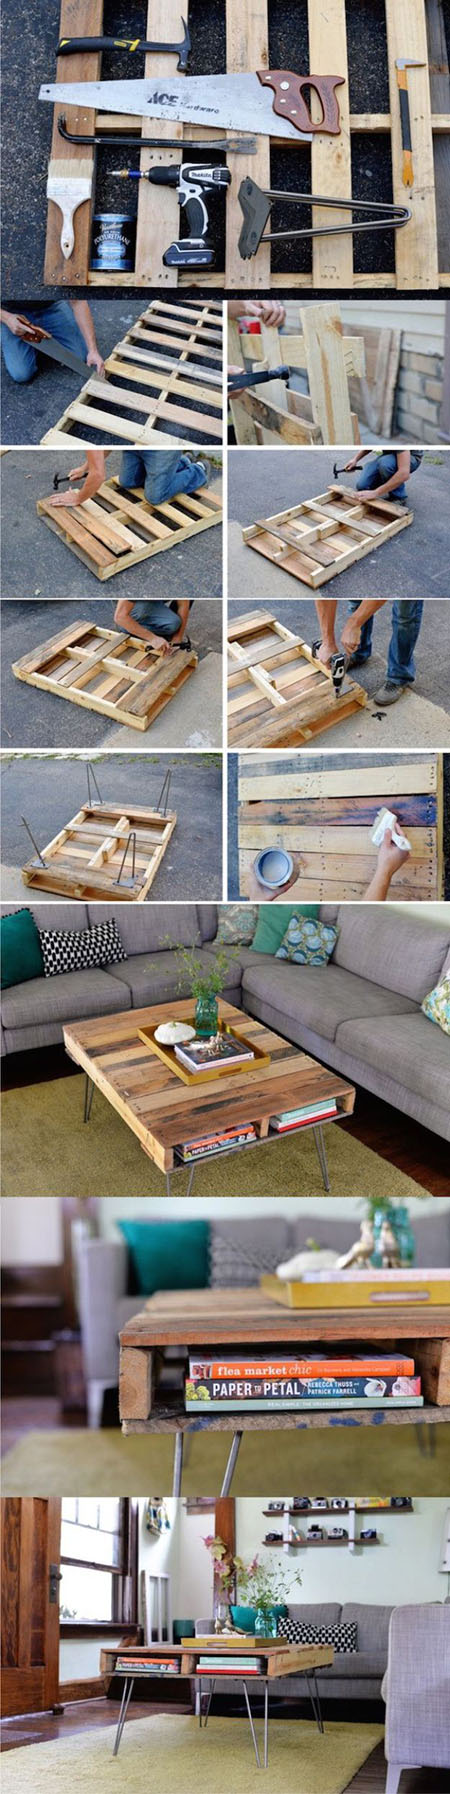 10 DIY Coffee Table Projects 8c27465e